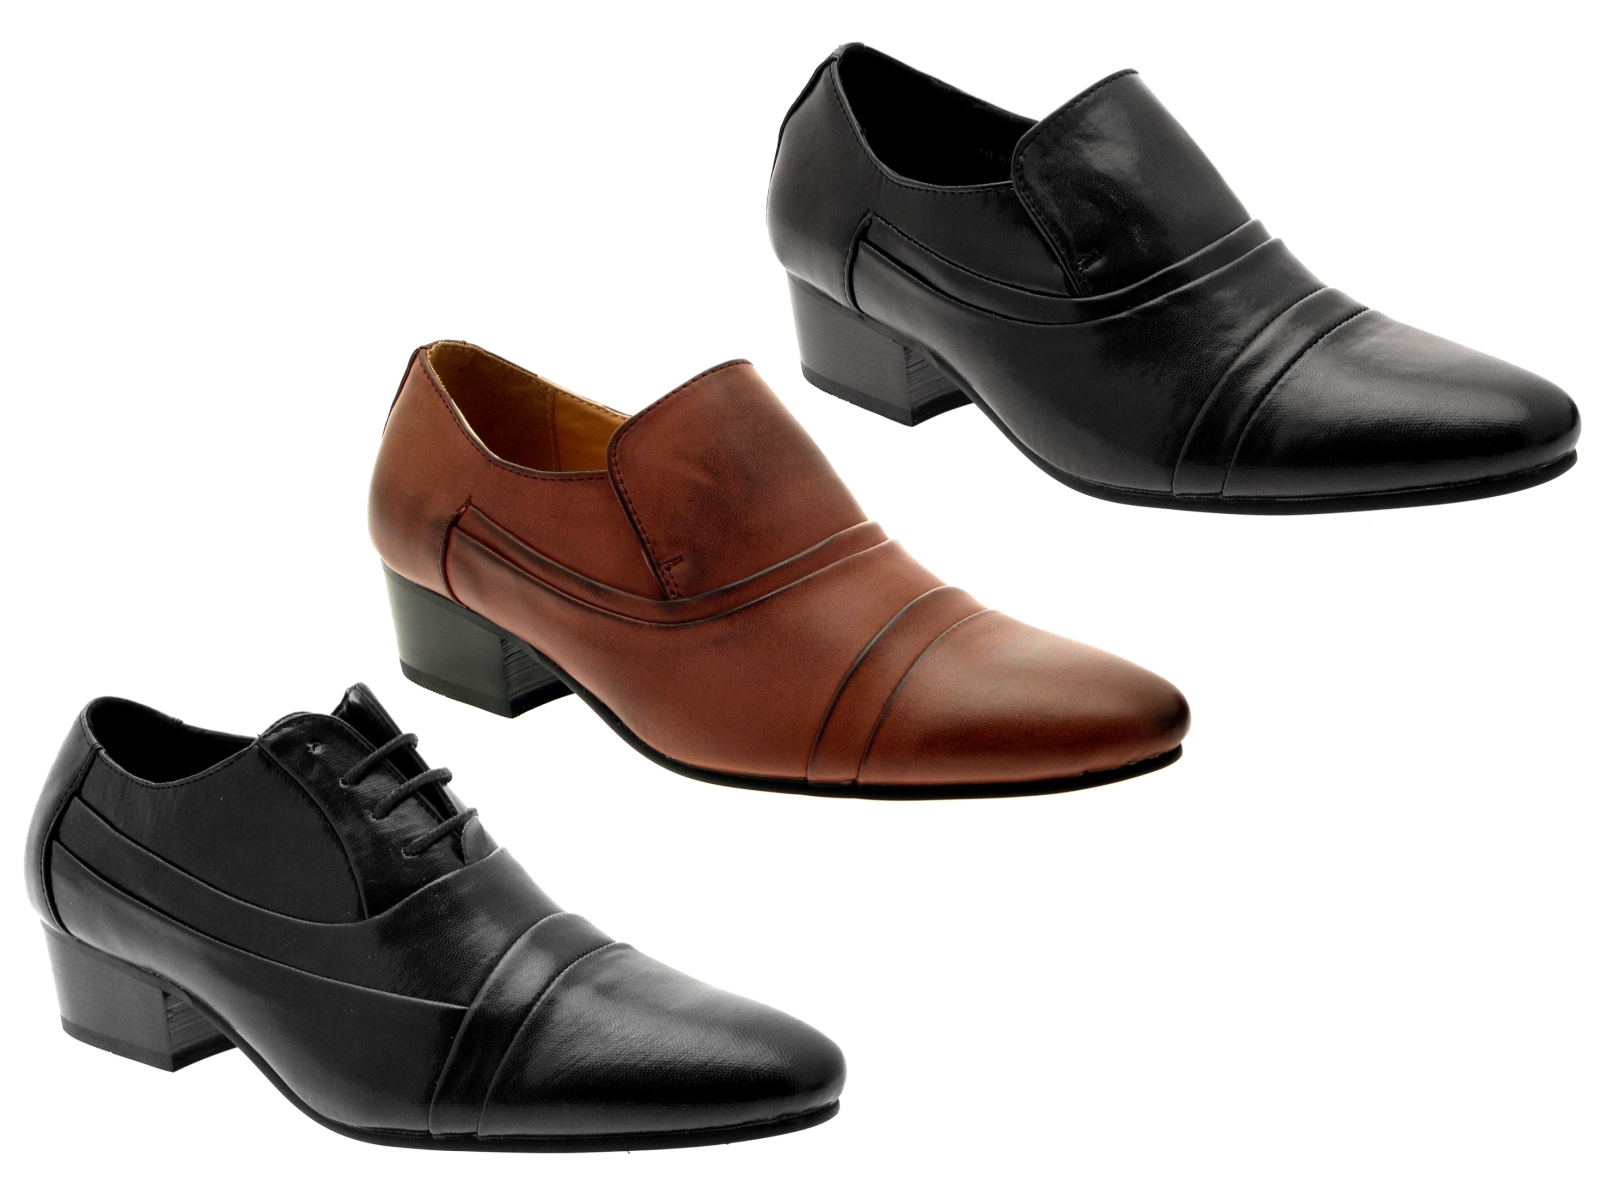 office shoes mens-smart-cuban-heels-formal-wedding-office-shoes- CNAQCRY